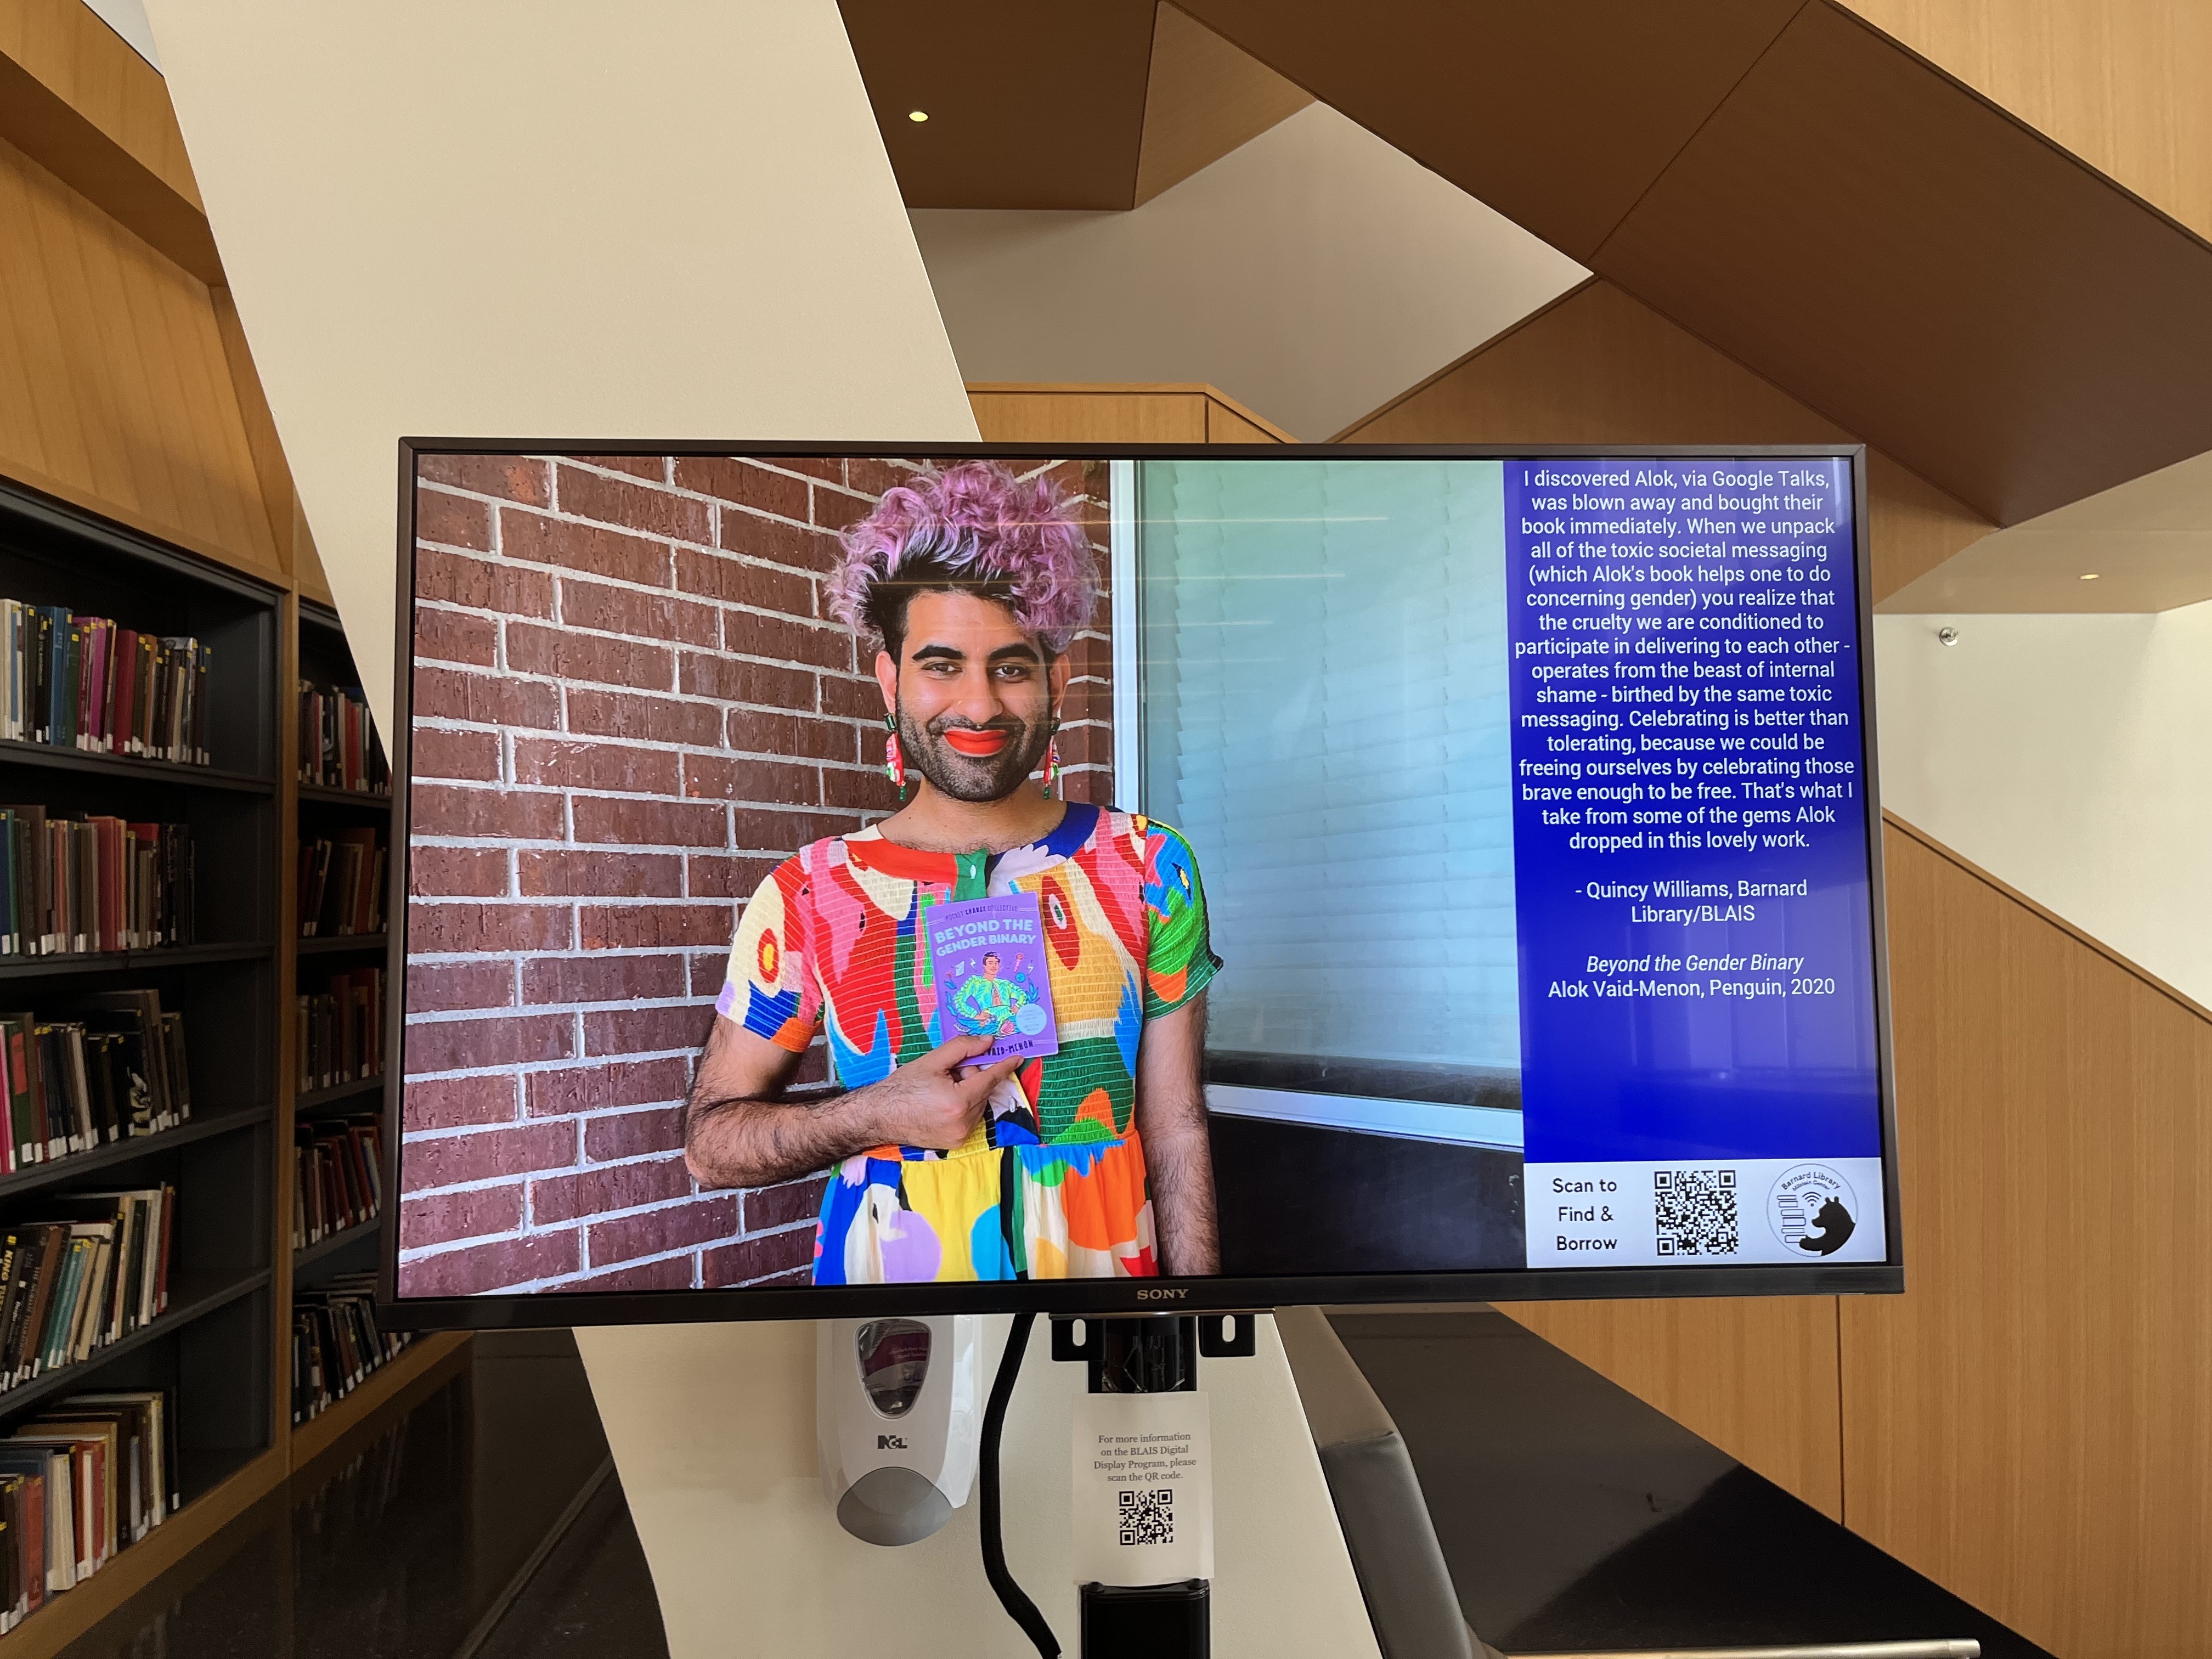 Digital screen in Milstein Lobby, displaying a photo of Alok Viad-Menon holding their book Beyond the Gender Binary. Alok is wearing a brightly patterned dress, as well as brightly colored earrings. They have a beard, pink hair, and are wearing red lipstick. To the right of the photo, there is text about the book from Quincy Williams.